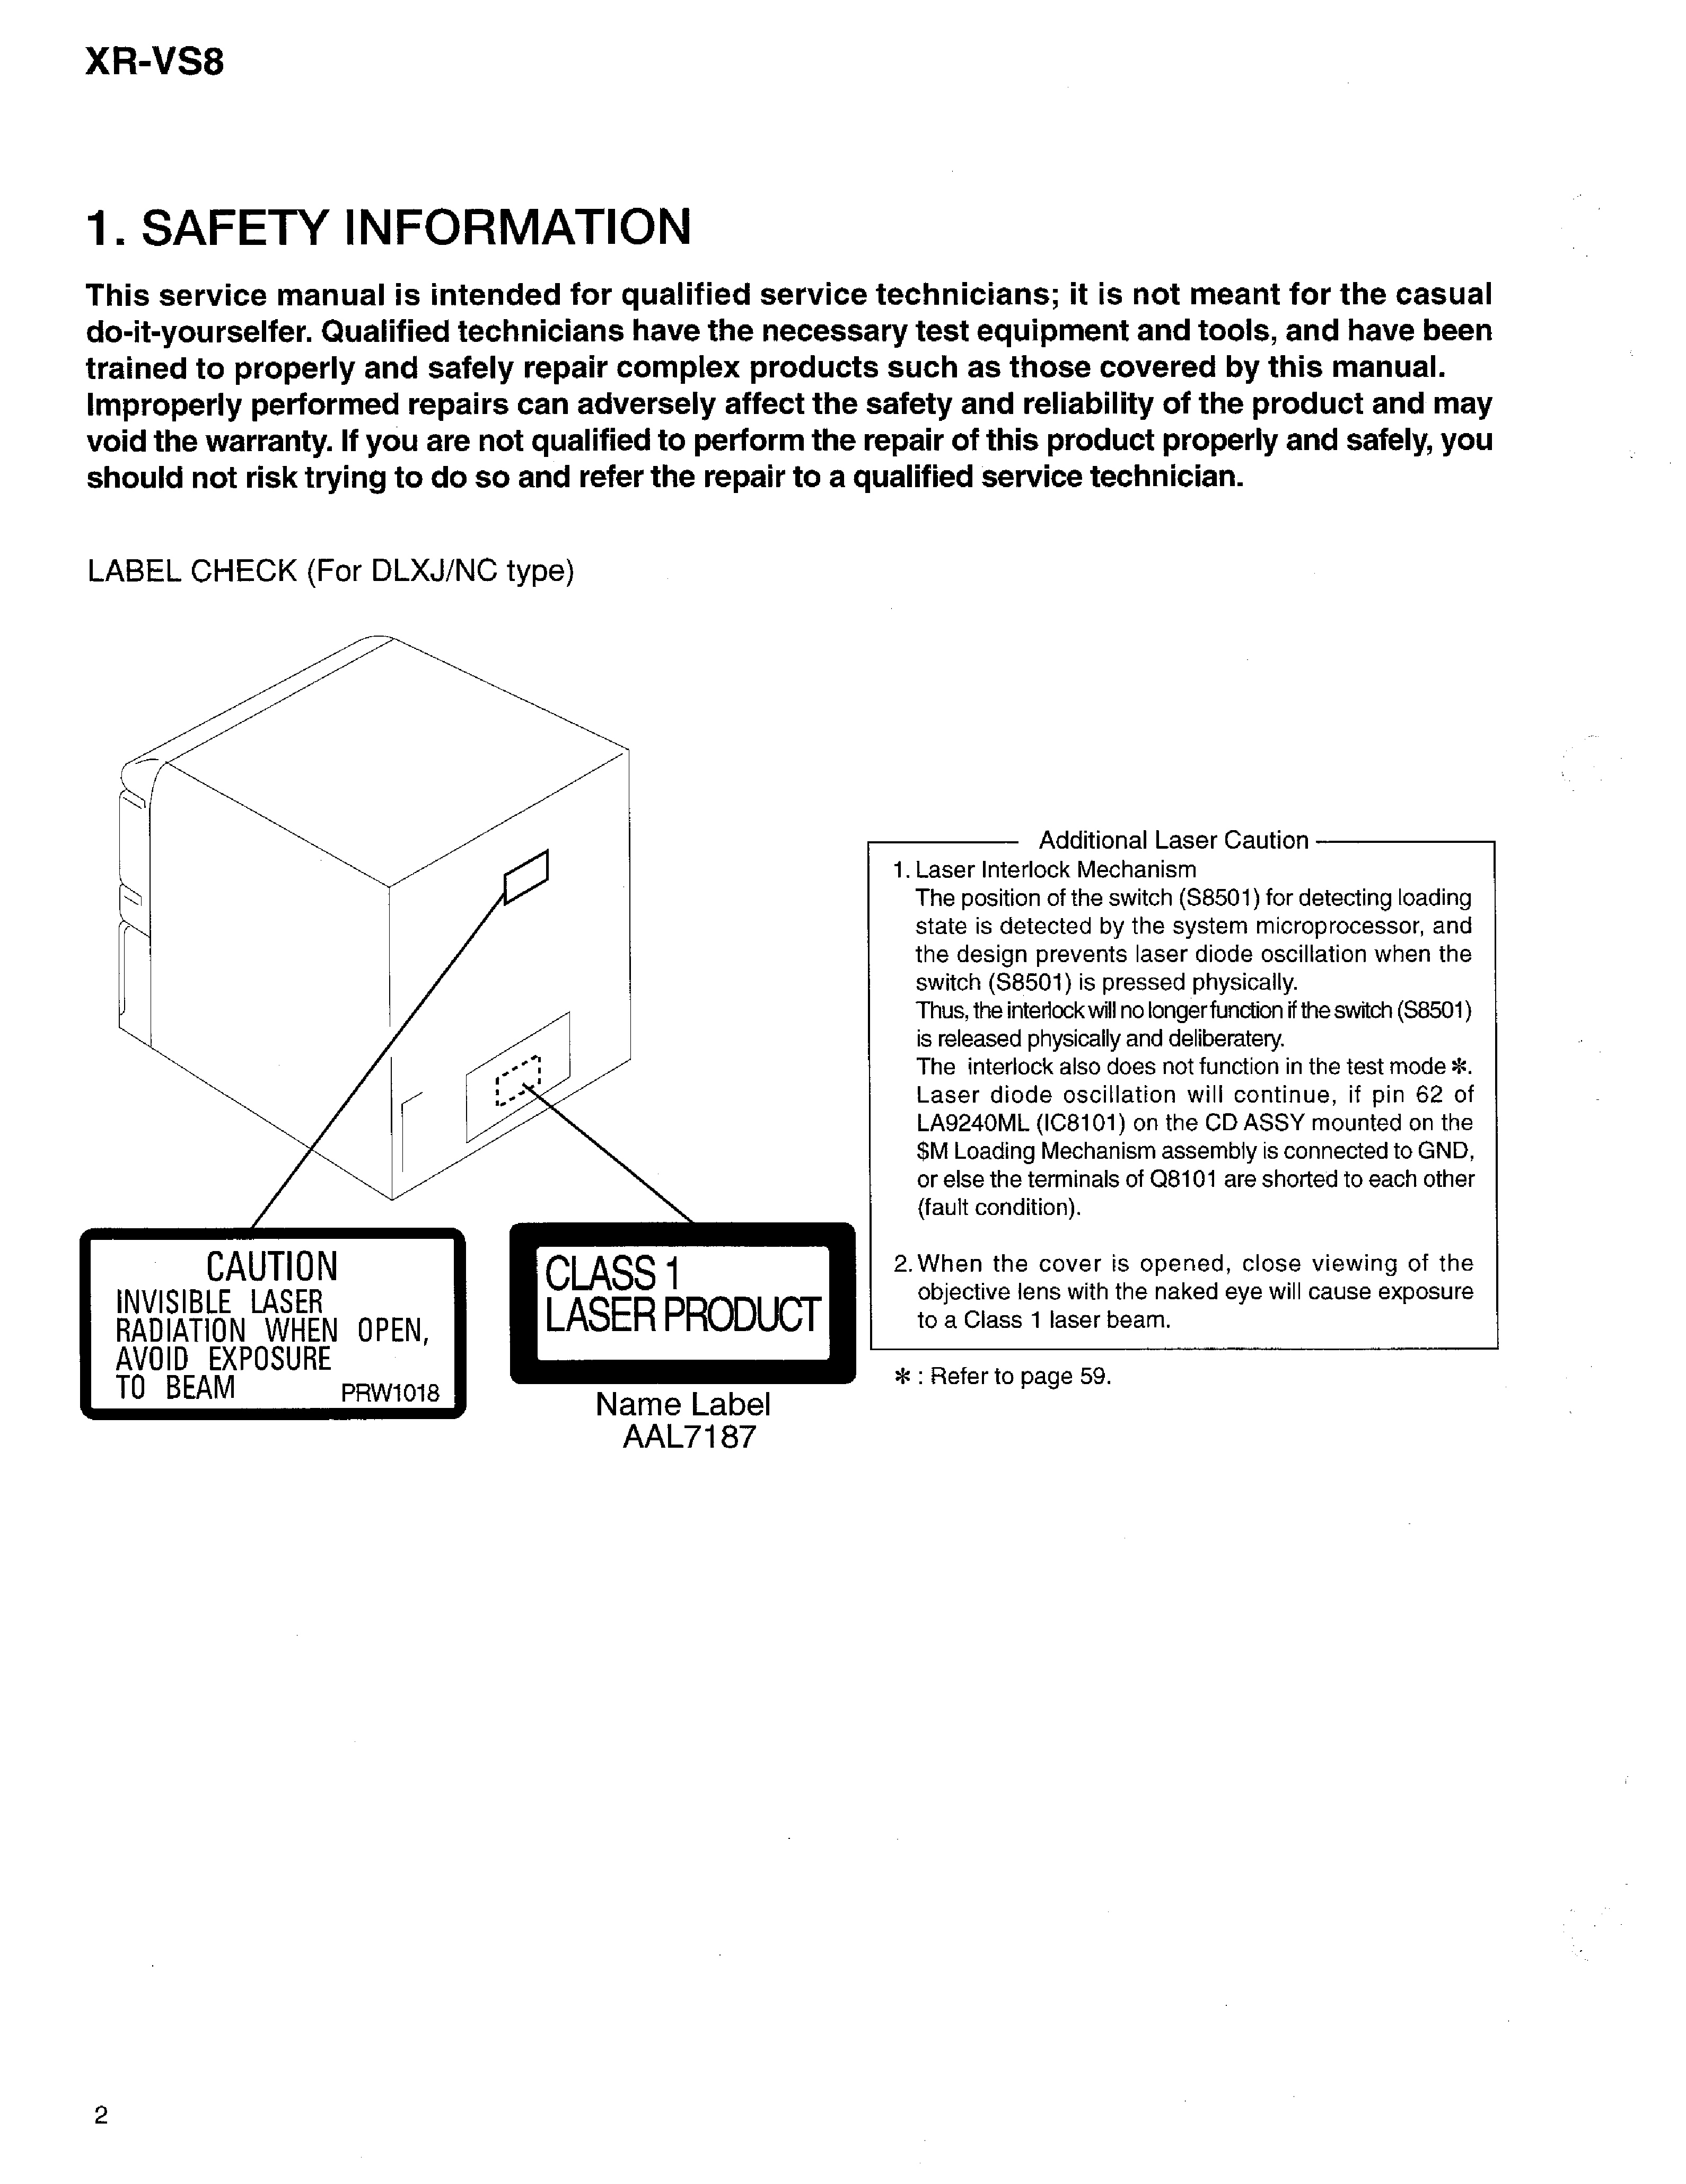 PIONEER XR-VS8 service manual (2nd page)